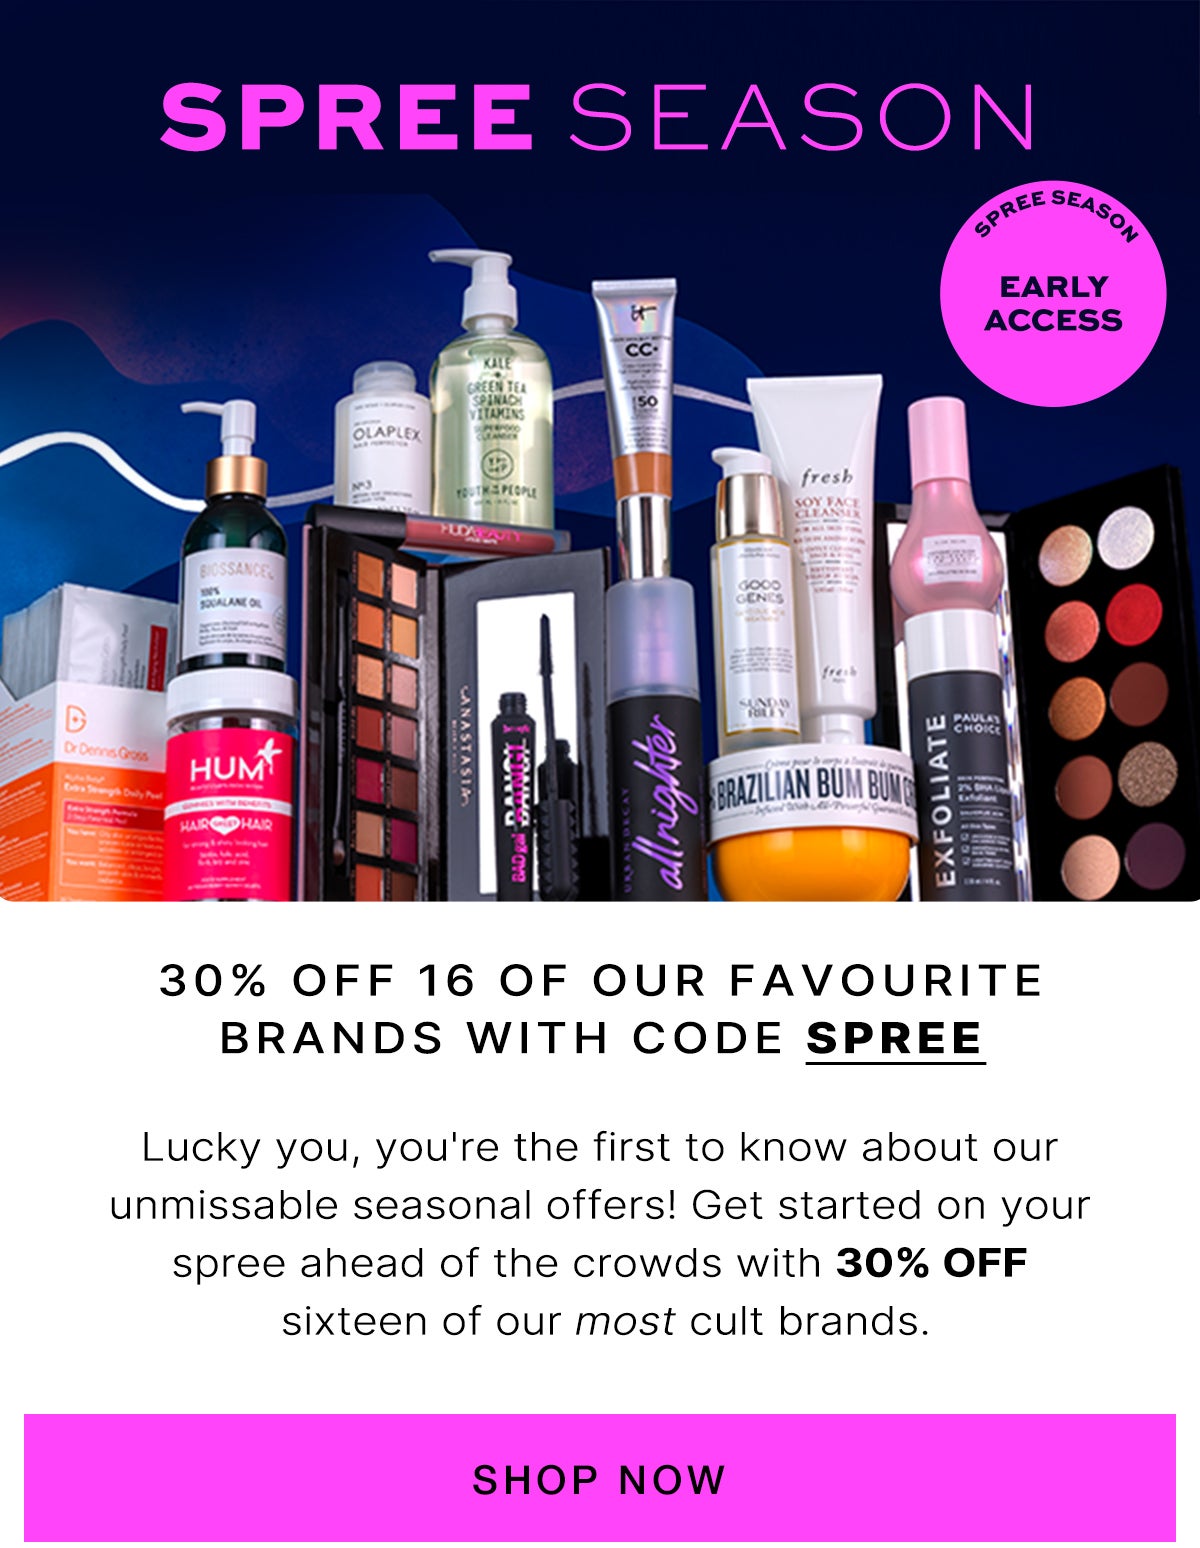 Spree season: lucky you, you're the first to know about our unmissable seasonal offers! Get started on your spree ahead of the crowds with 30% off sixteen of our most cult brands.